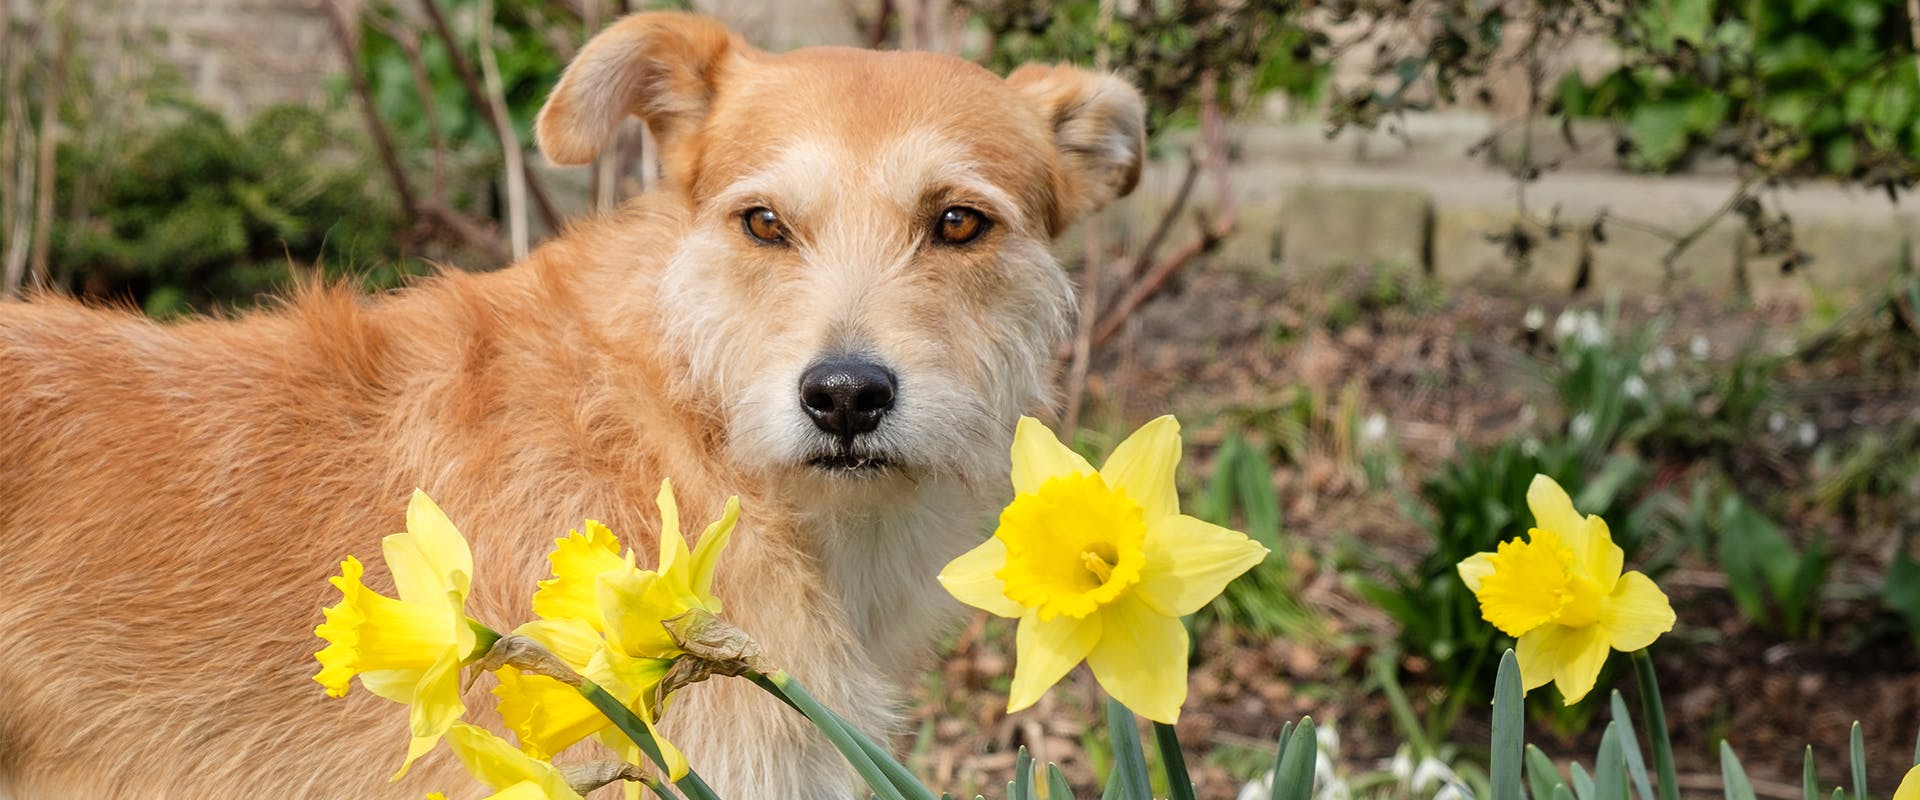 A dog standing outdoors next to a bunch of daffodils